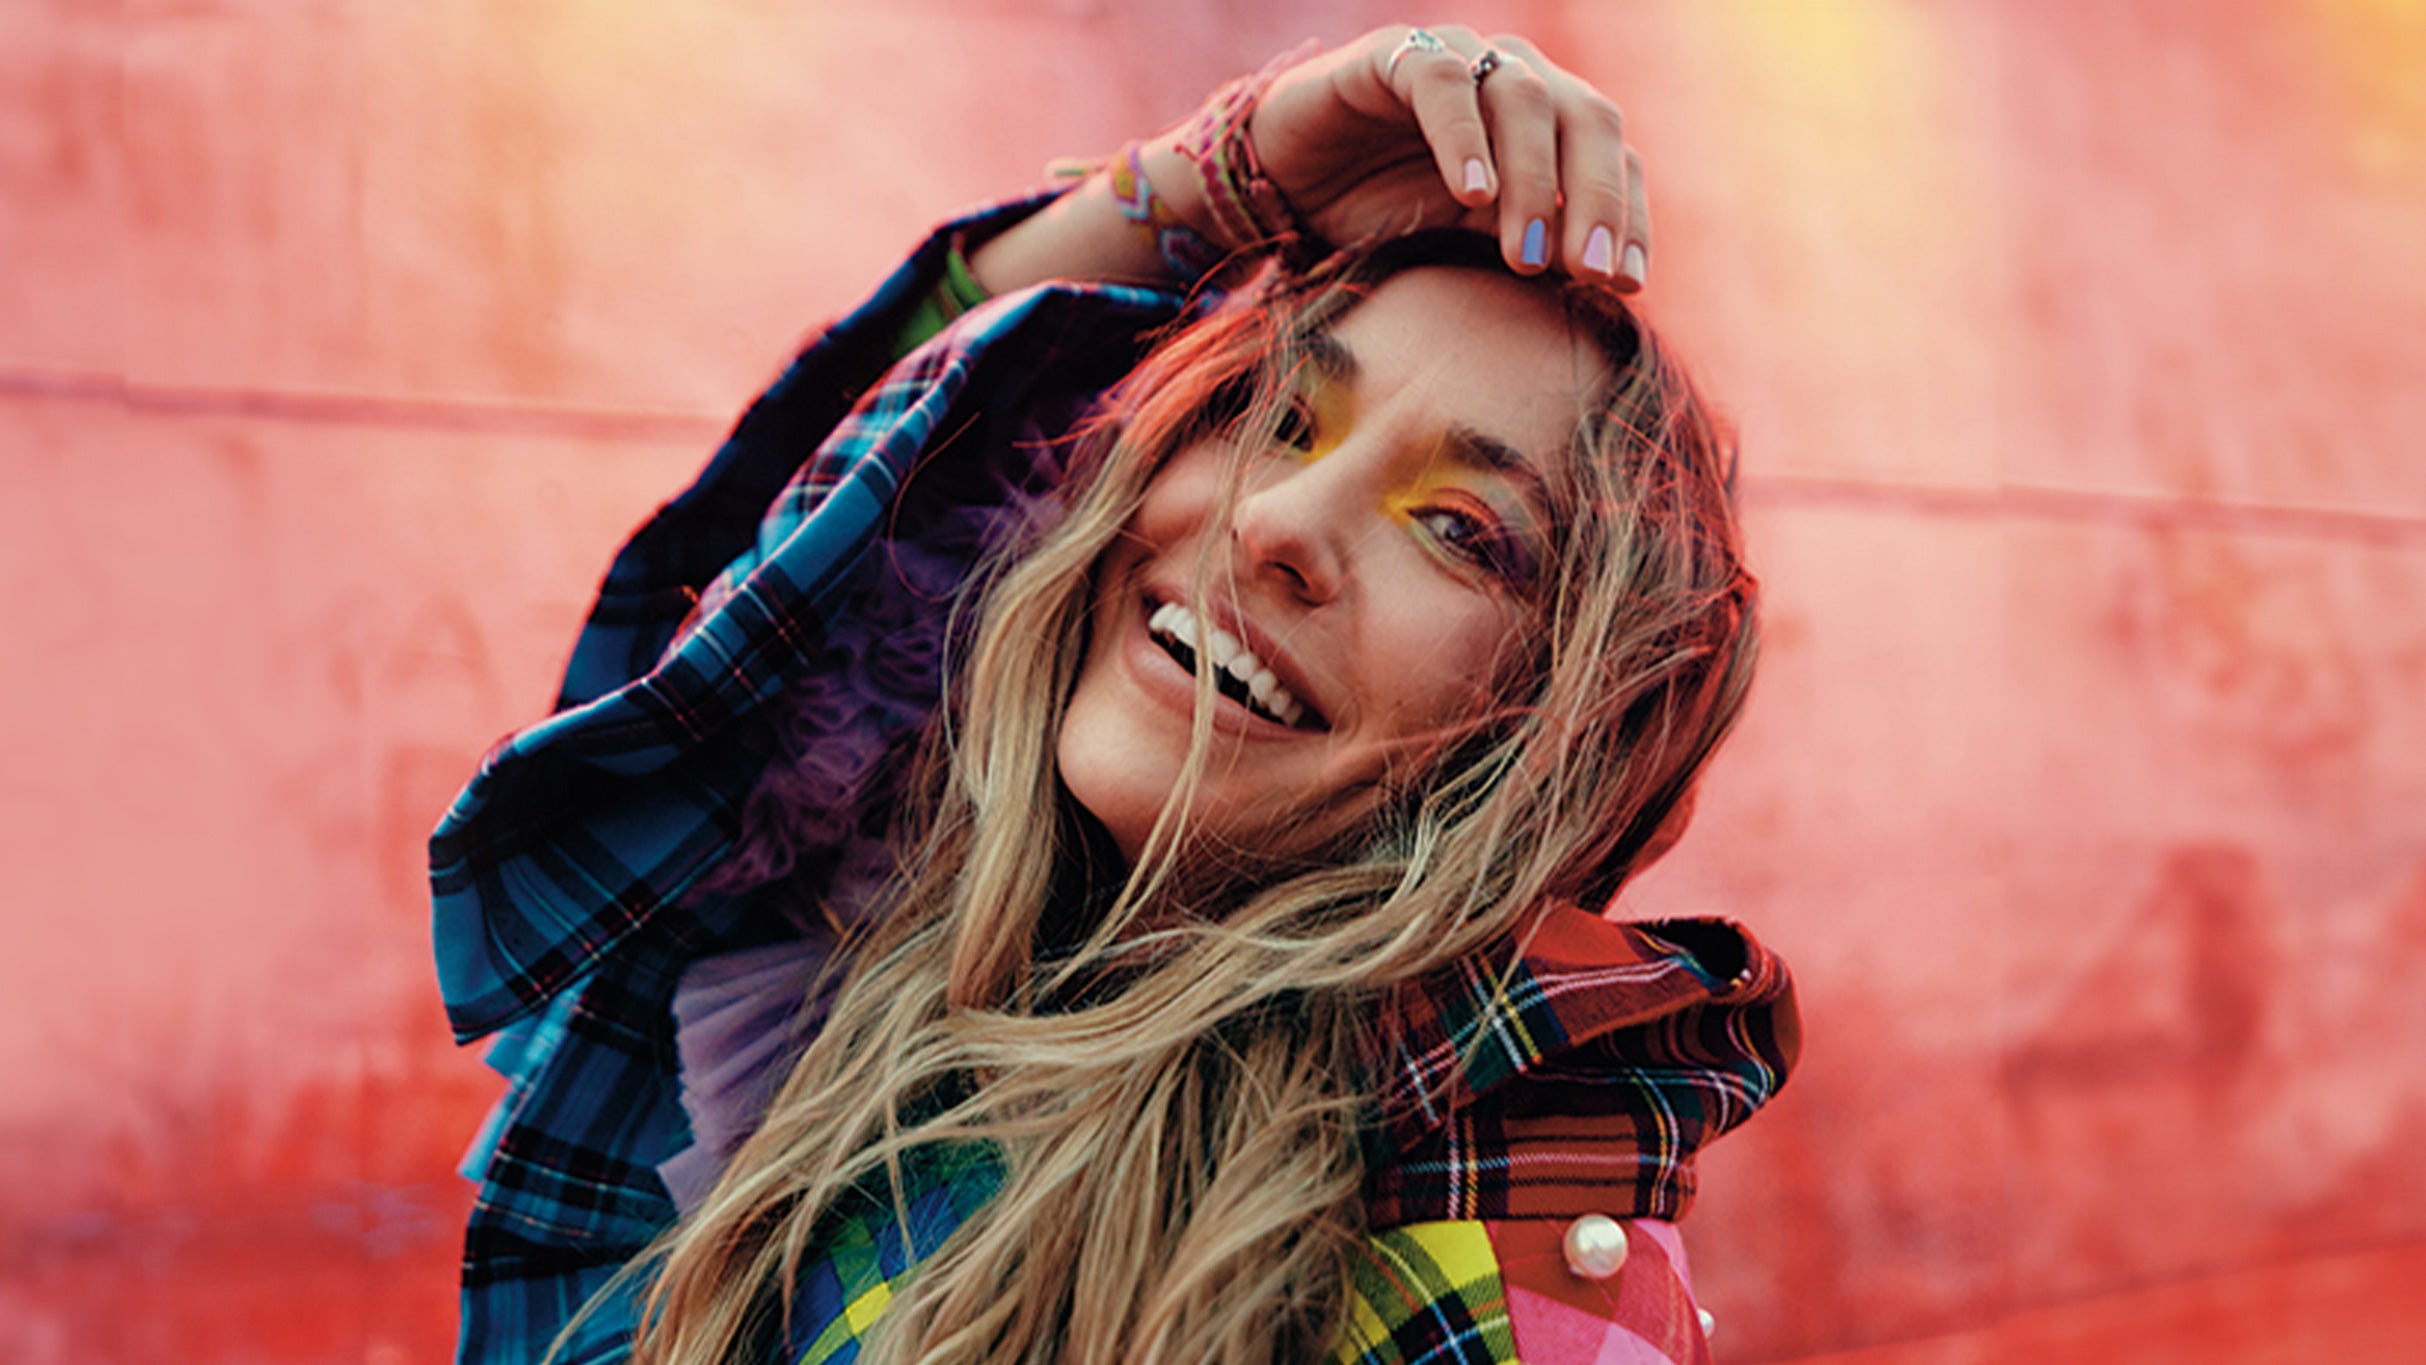 Lauren Daigle in Auckland promo photo for Mastercard presale offer code